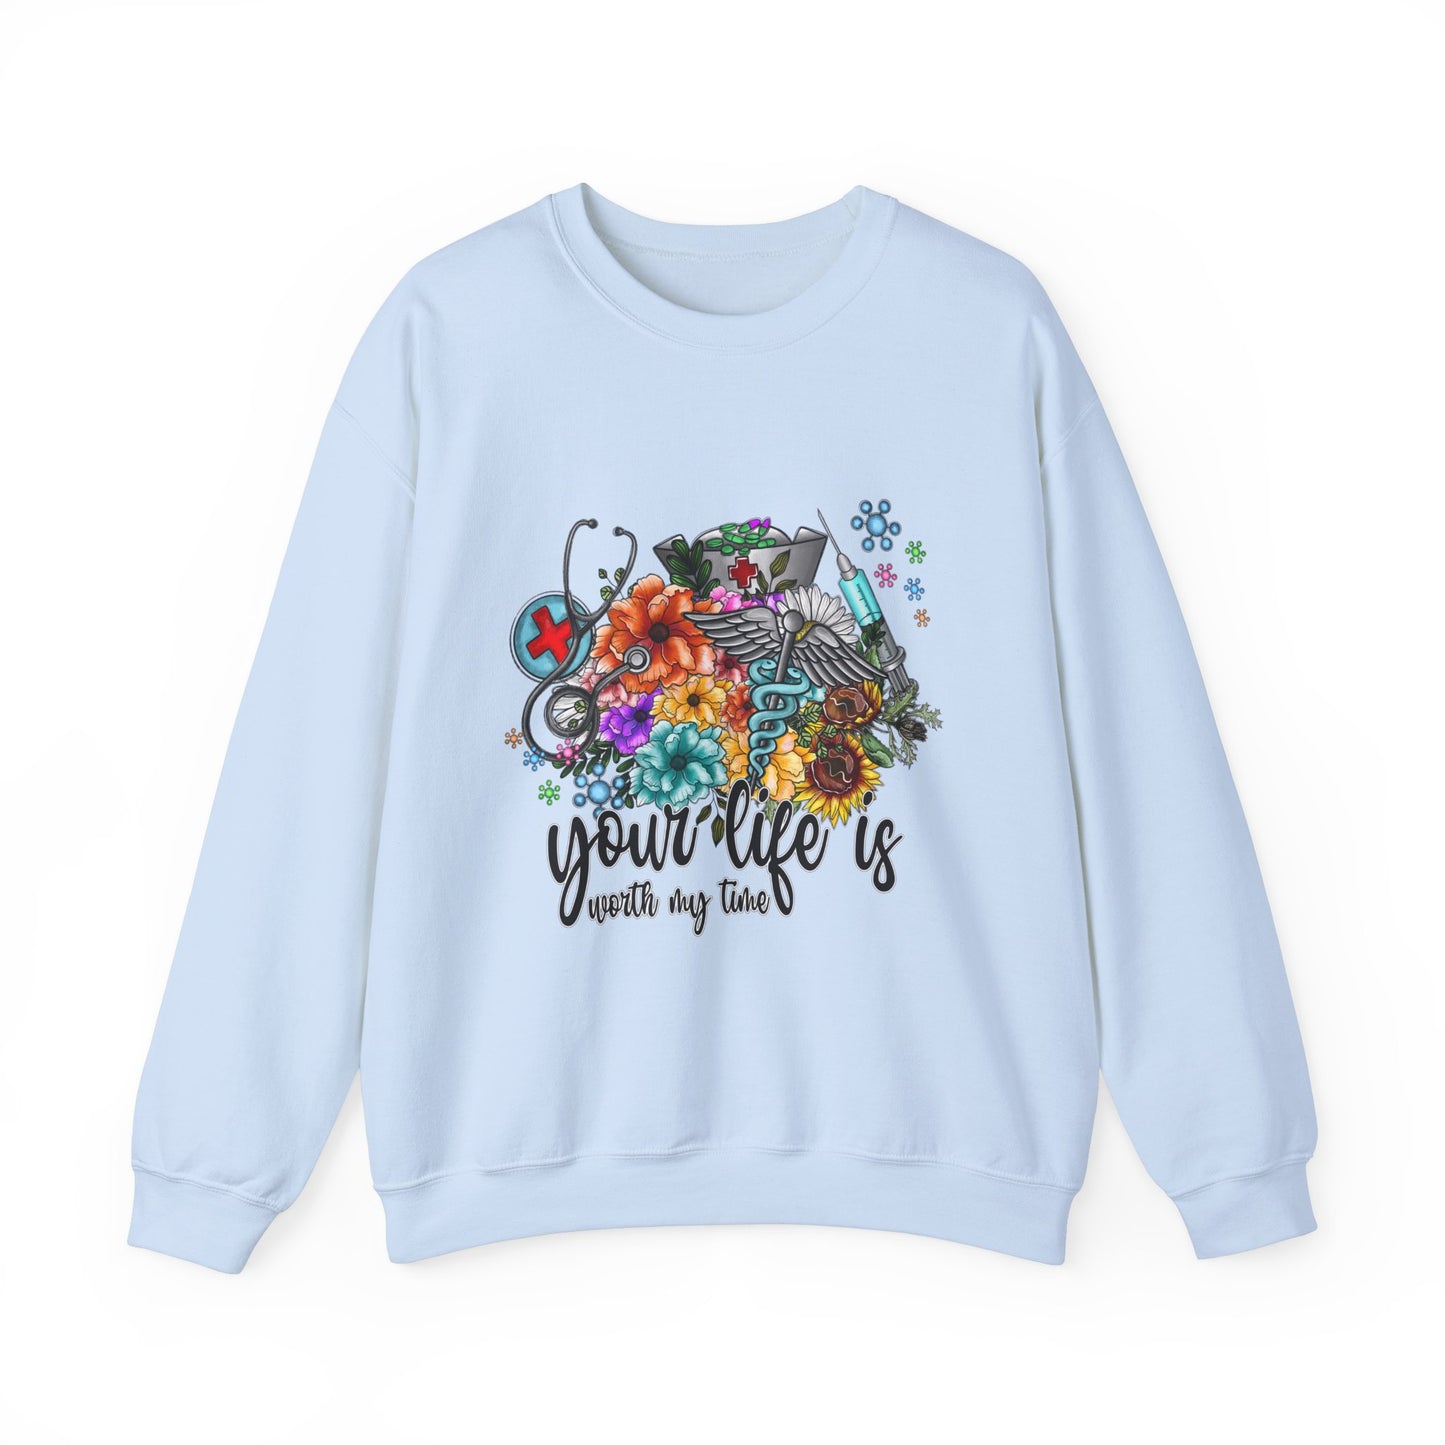 Your Life is Worth My Time Sweatshirt